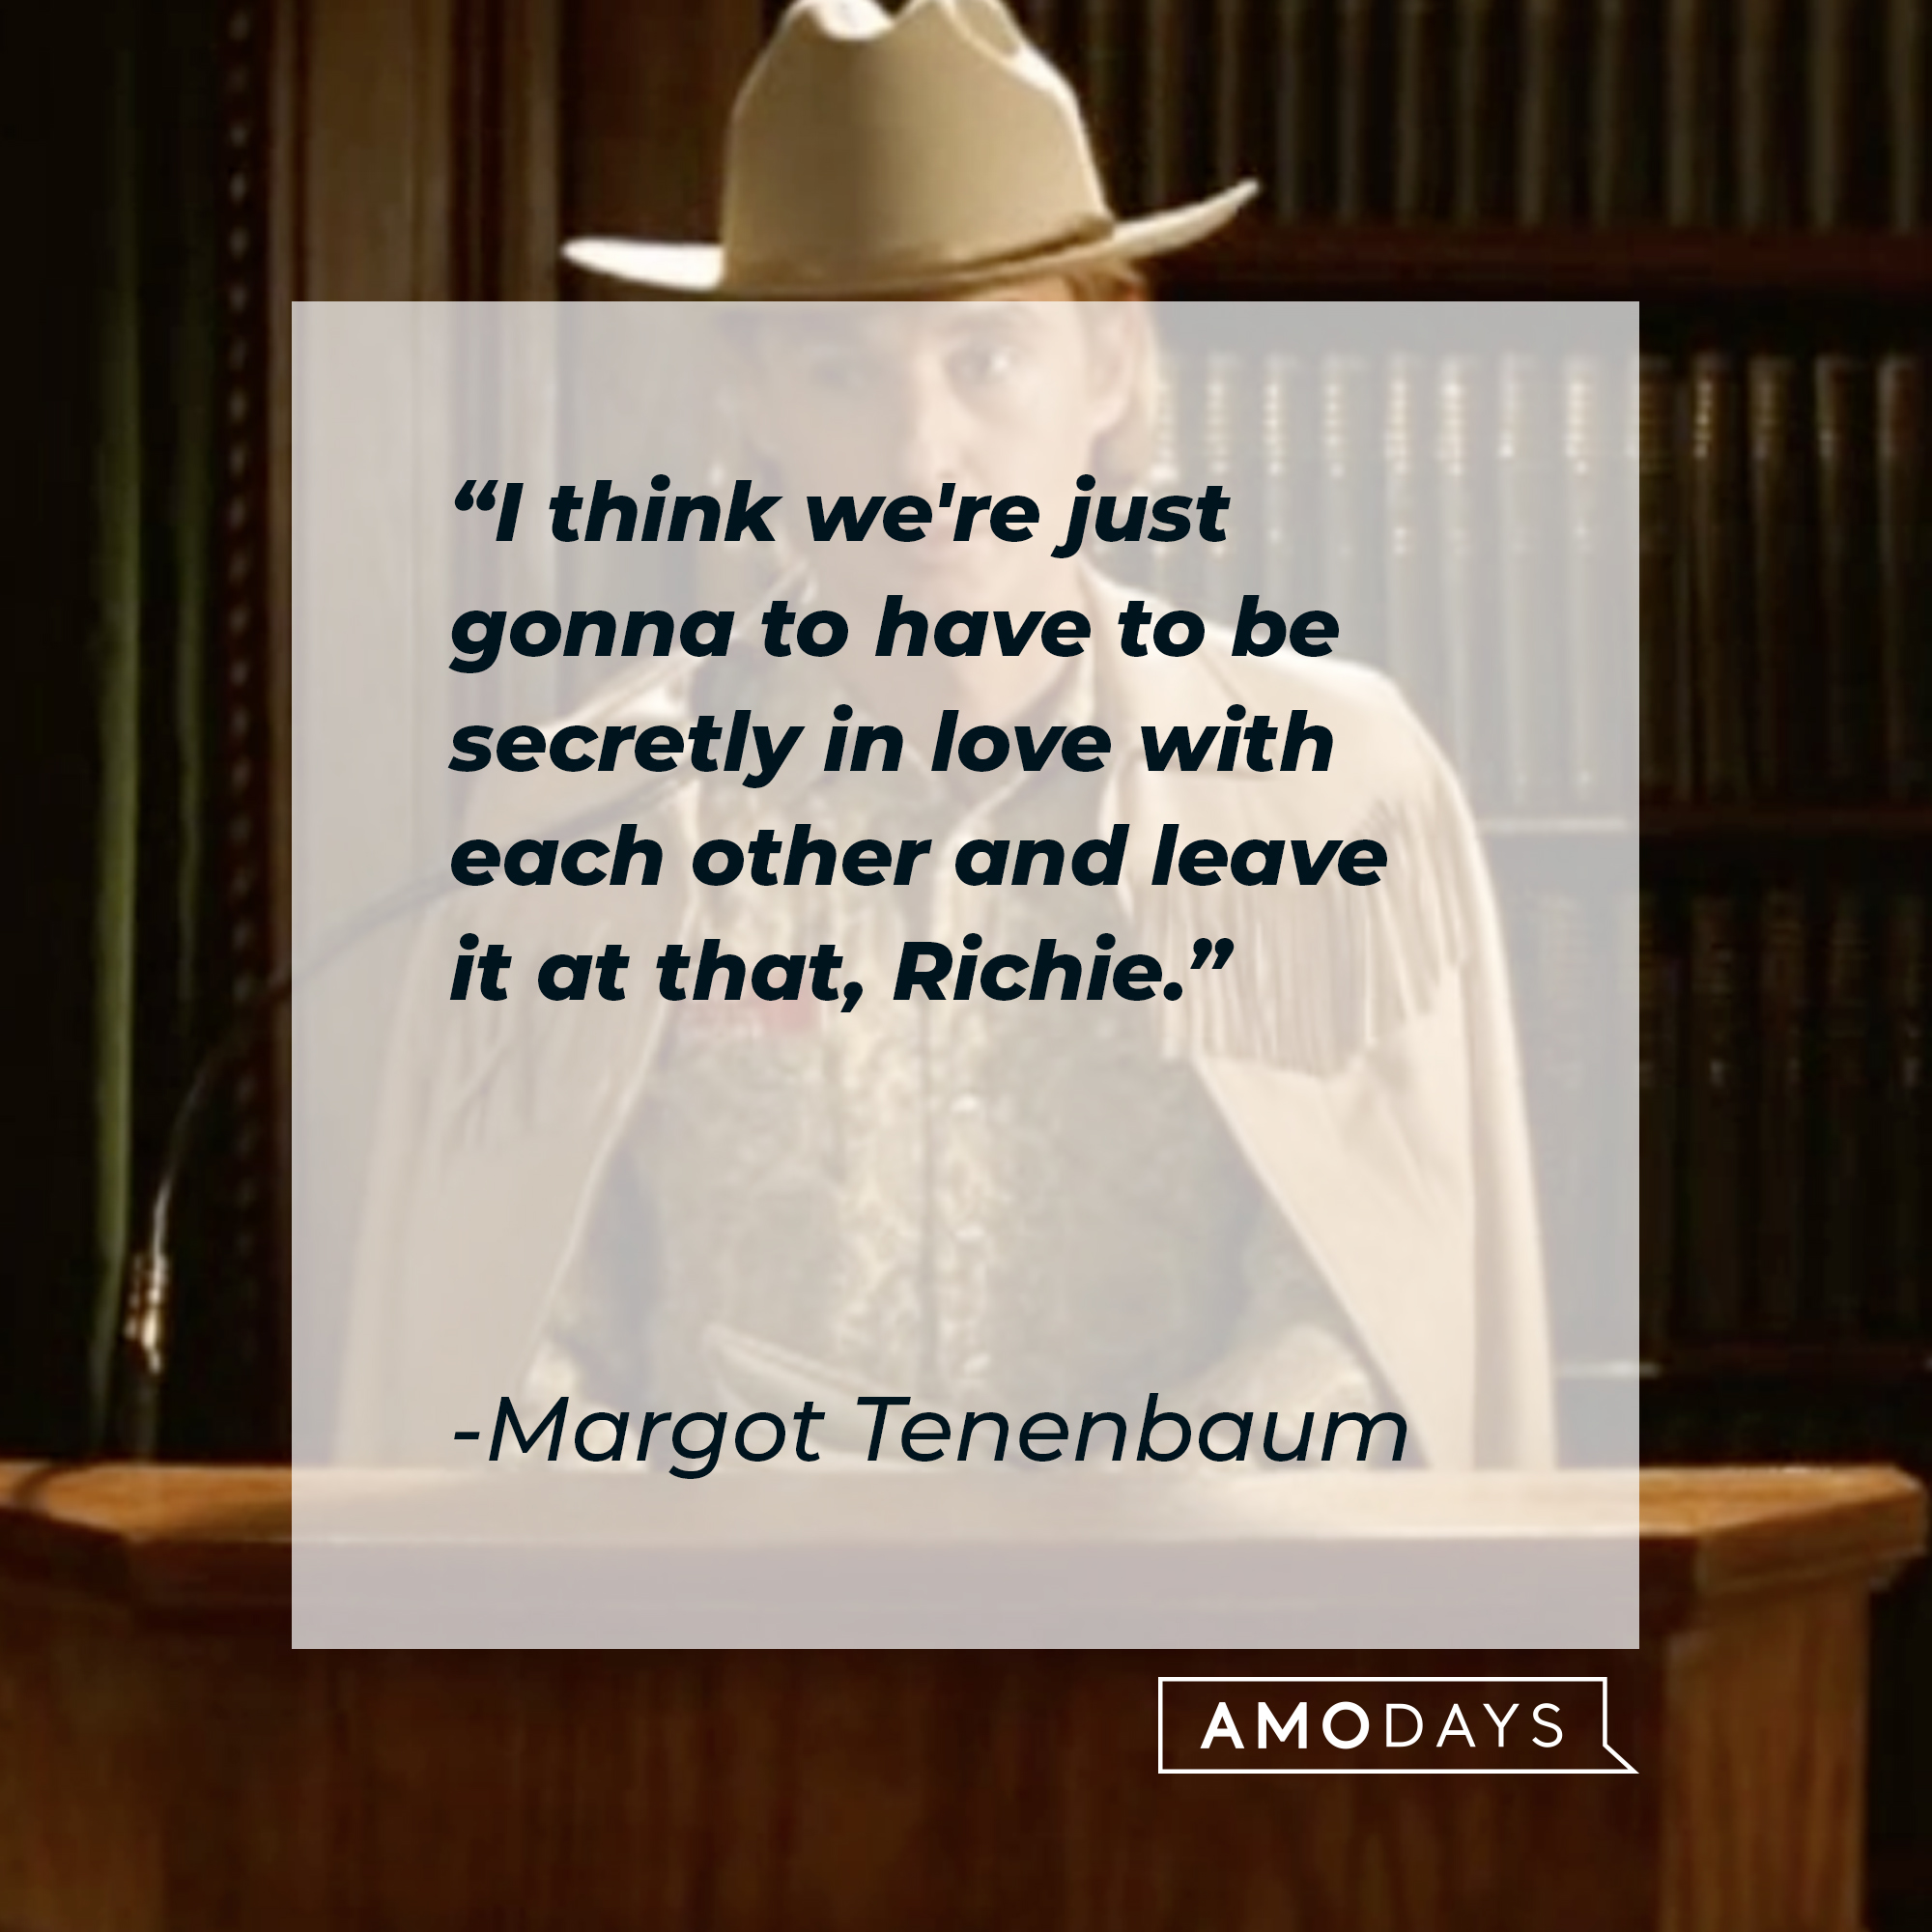 Margot Tenenbaum's quote: "I think we're just gonna to have to be secretly in love with each other and leave it at that, Richie." | Image: AmoDays